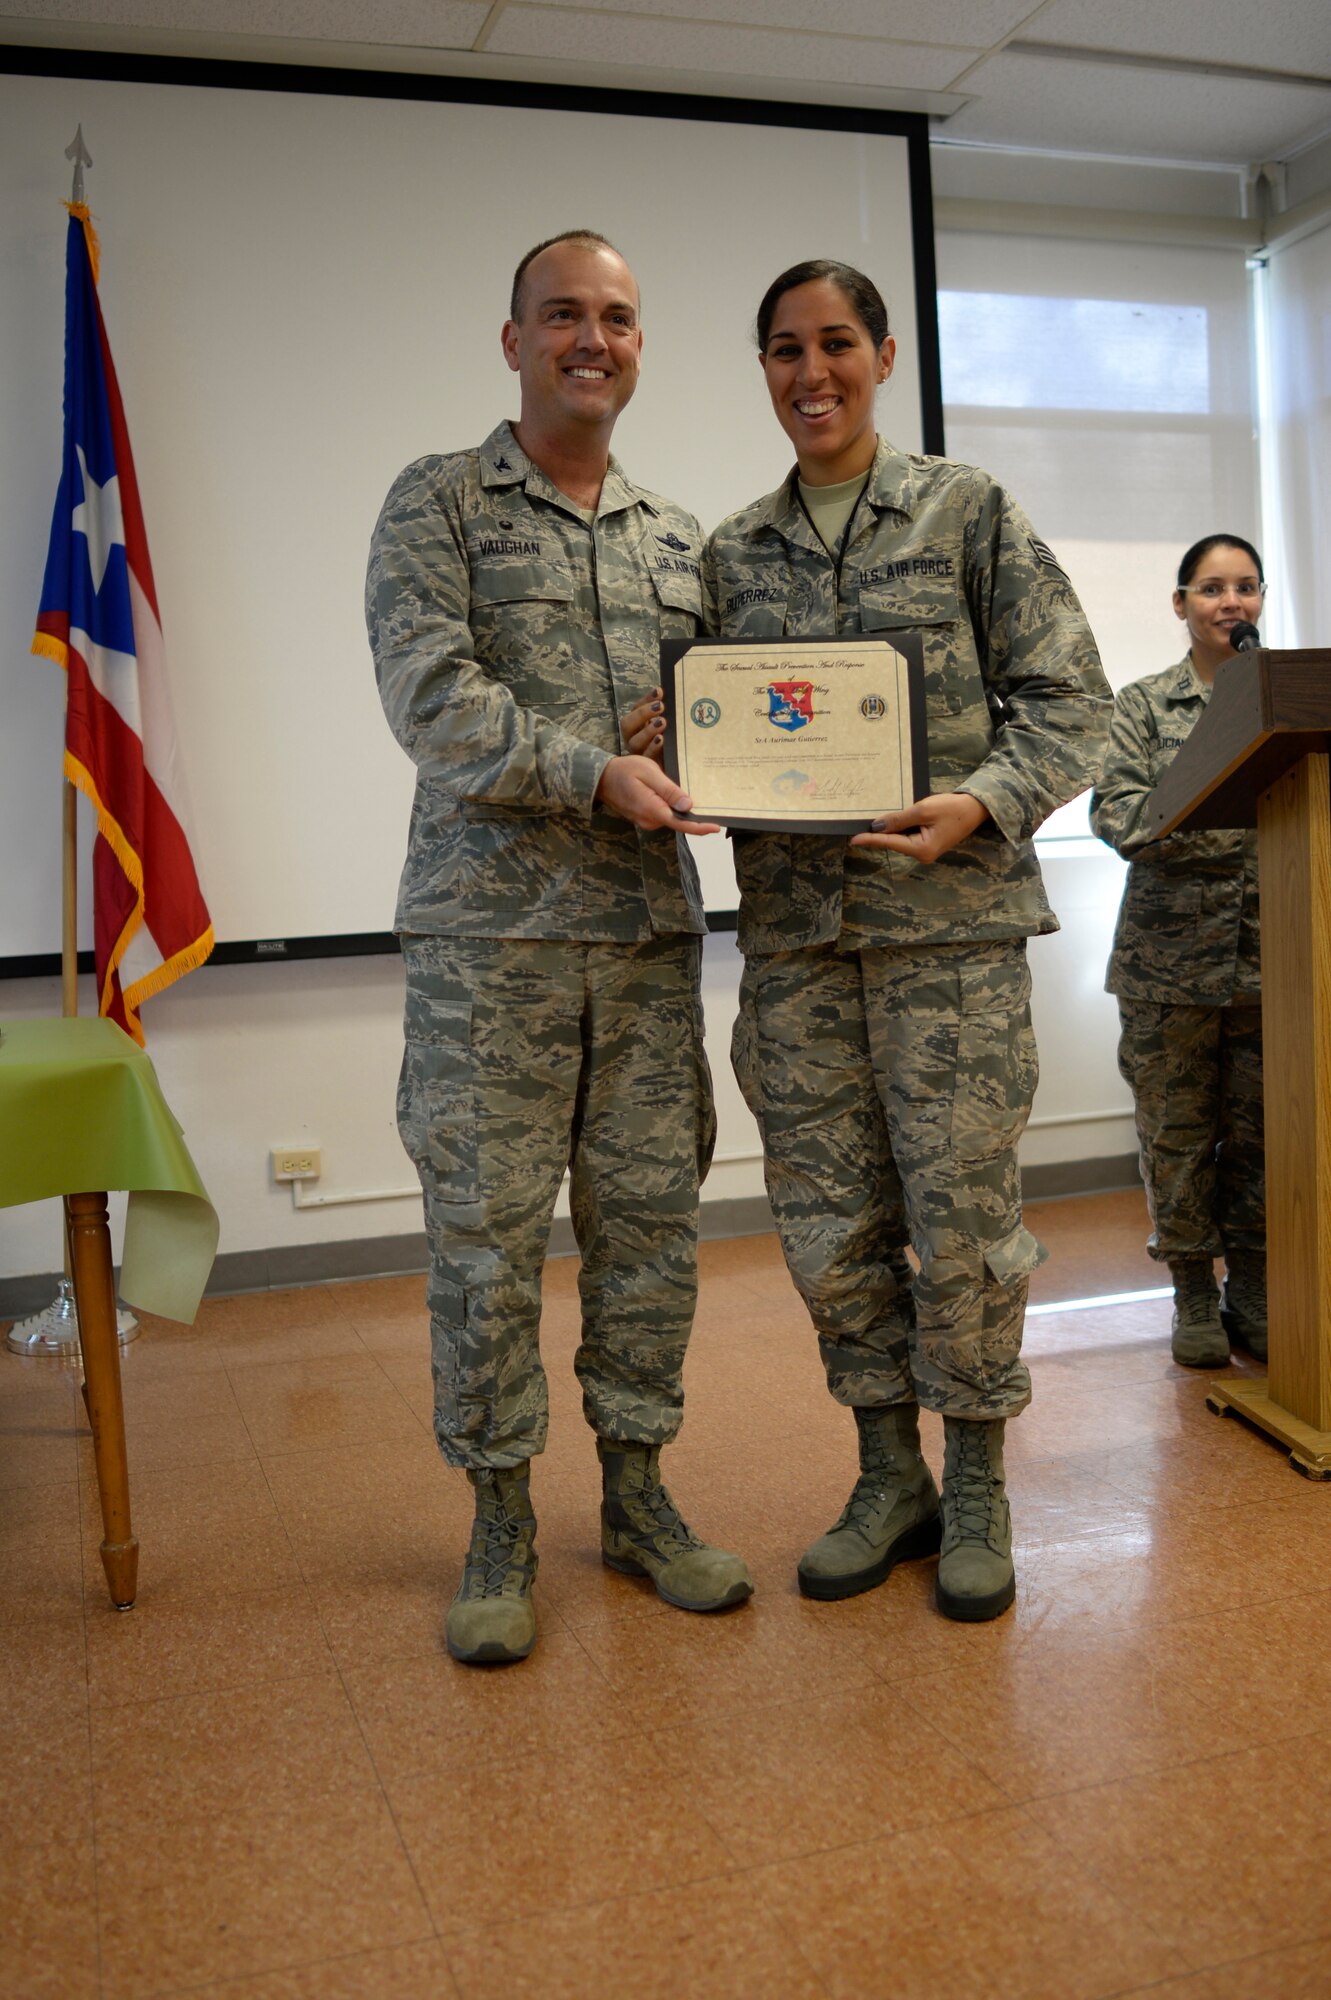 U.S. Air Force Senior Airman Aurimar Guiterrez of the 156th Airlift Wing receives recognition from the 156th AW Commander, Col. Edward L. Vaughan, for her volunteer efforts and support of the Sexual Assault Prevention and Response Program during an appreciation breakfast held at Muñiz Air National Guard Base, Carolina, Puerto Rico, April 14. (U.S. Air National Guard photo by Staff Sgt. Christian Jadot)